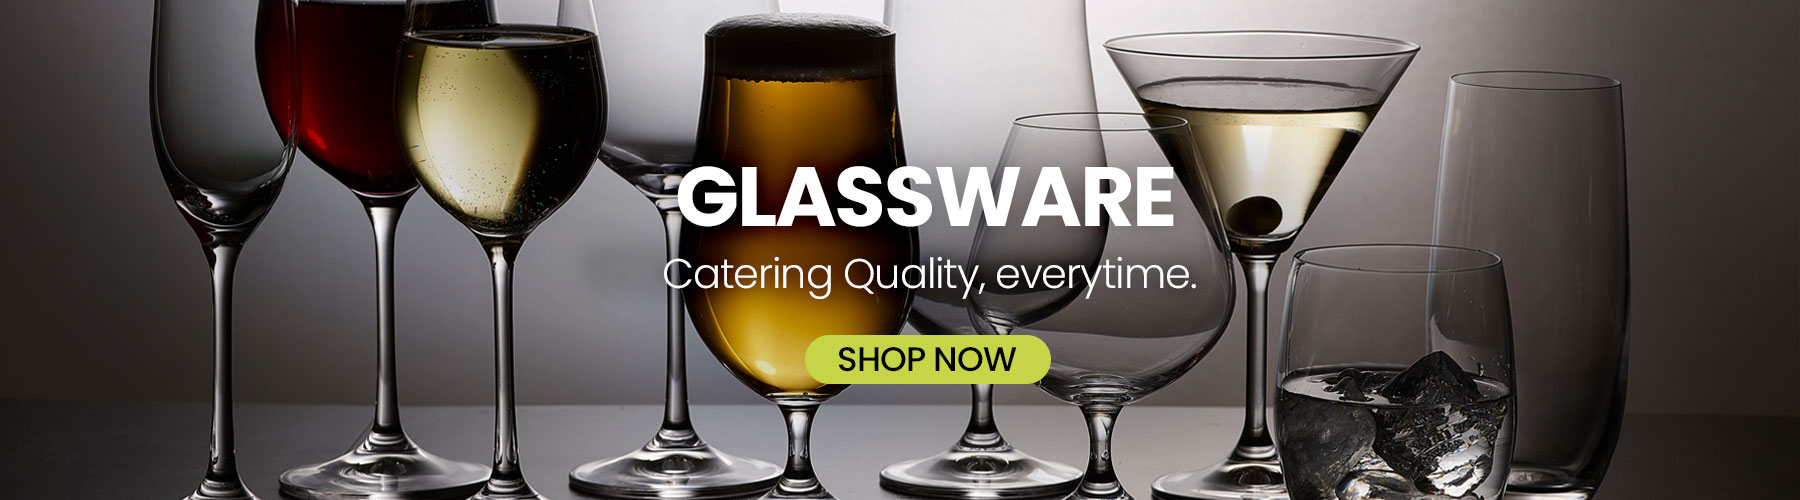 Catering-Quality-Glassware-wine glasses-champagne flutes